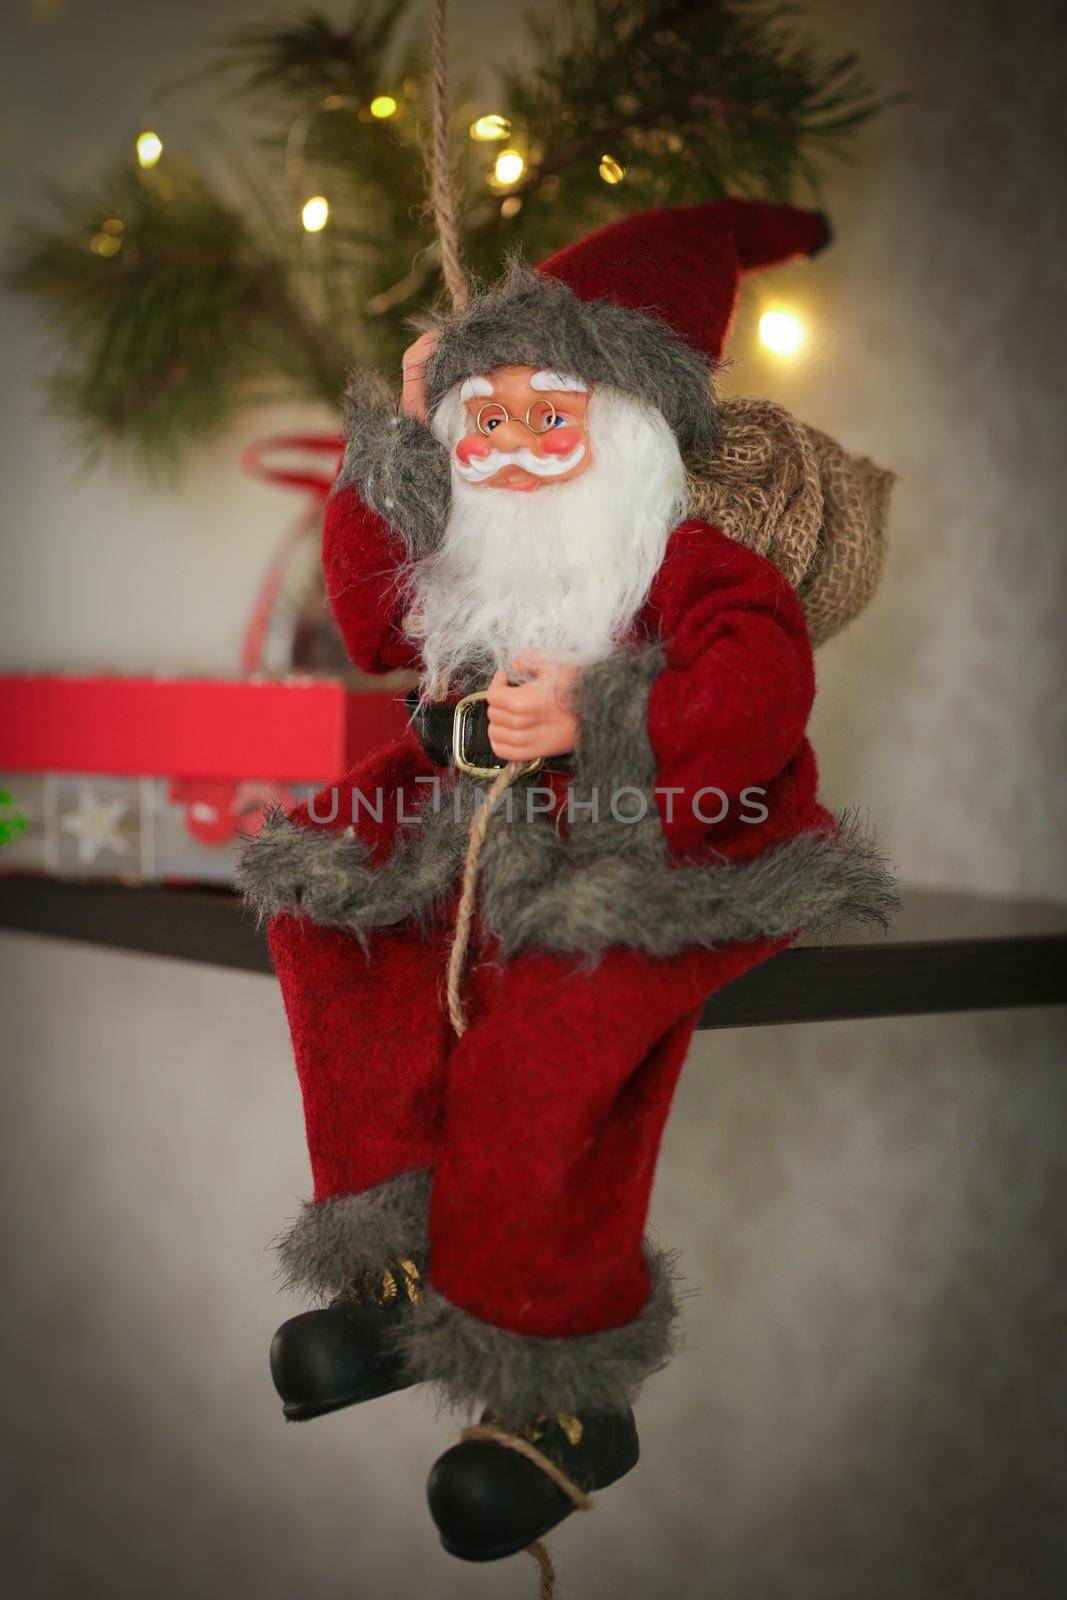 Toy Santa Claus sitting with gifts and Christmas decorations. Happy New Year coming